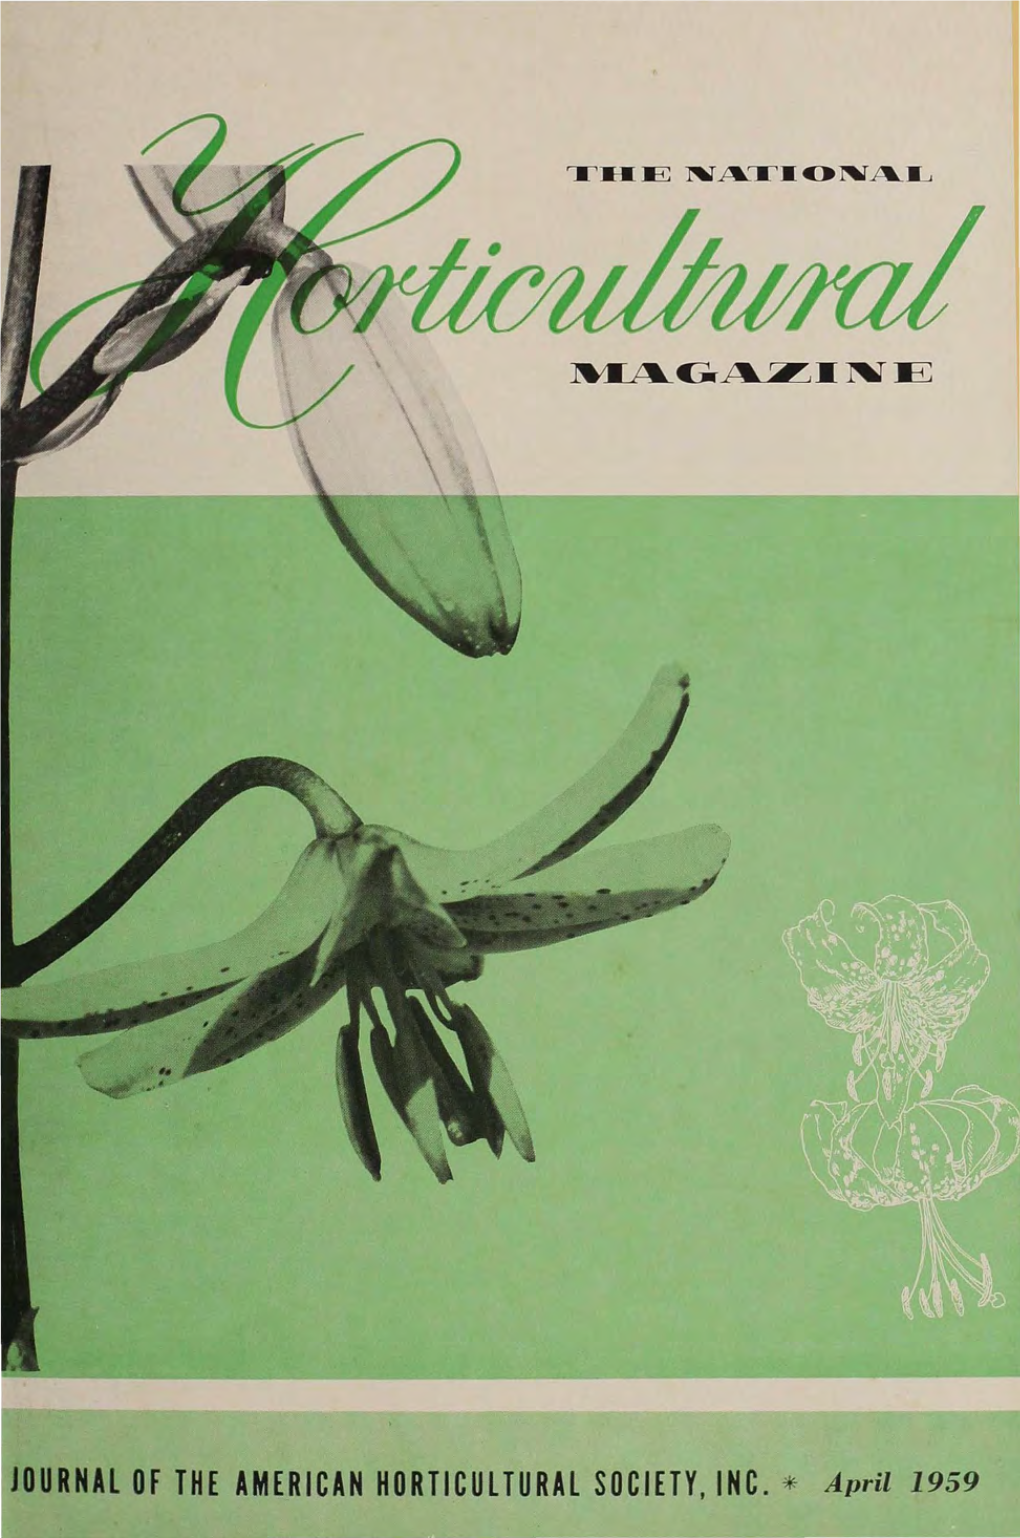 April 1959 the National HORTICULTURAL Magazine